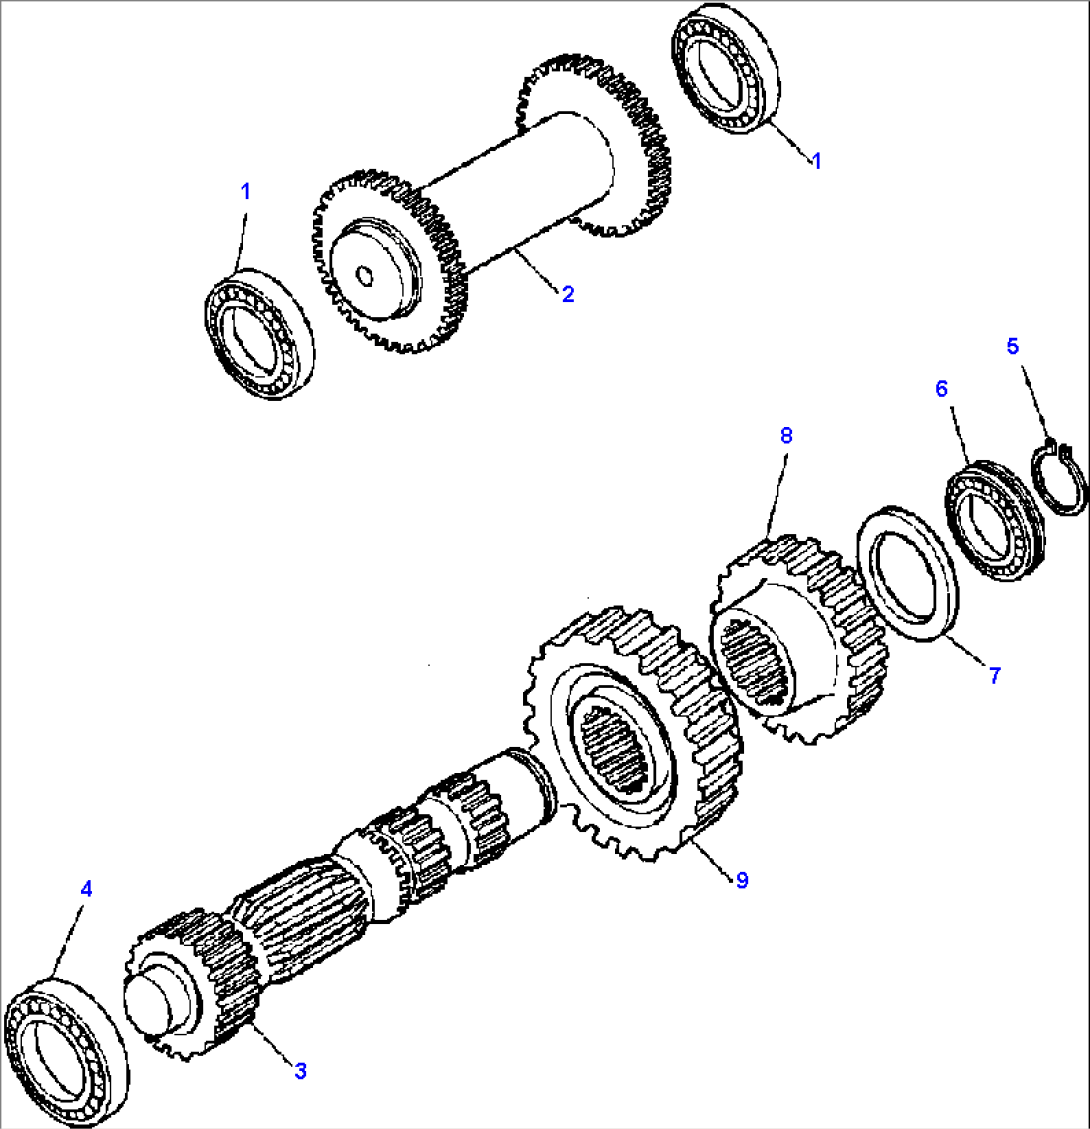 FIG. F3240-01A0 TRANSMISSION (4WD) - PRIMARY AND REVERSE SHAFT AND GEAR